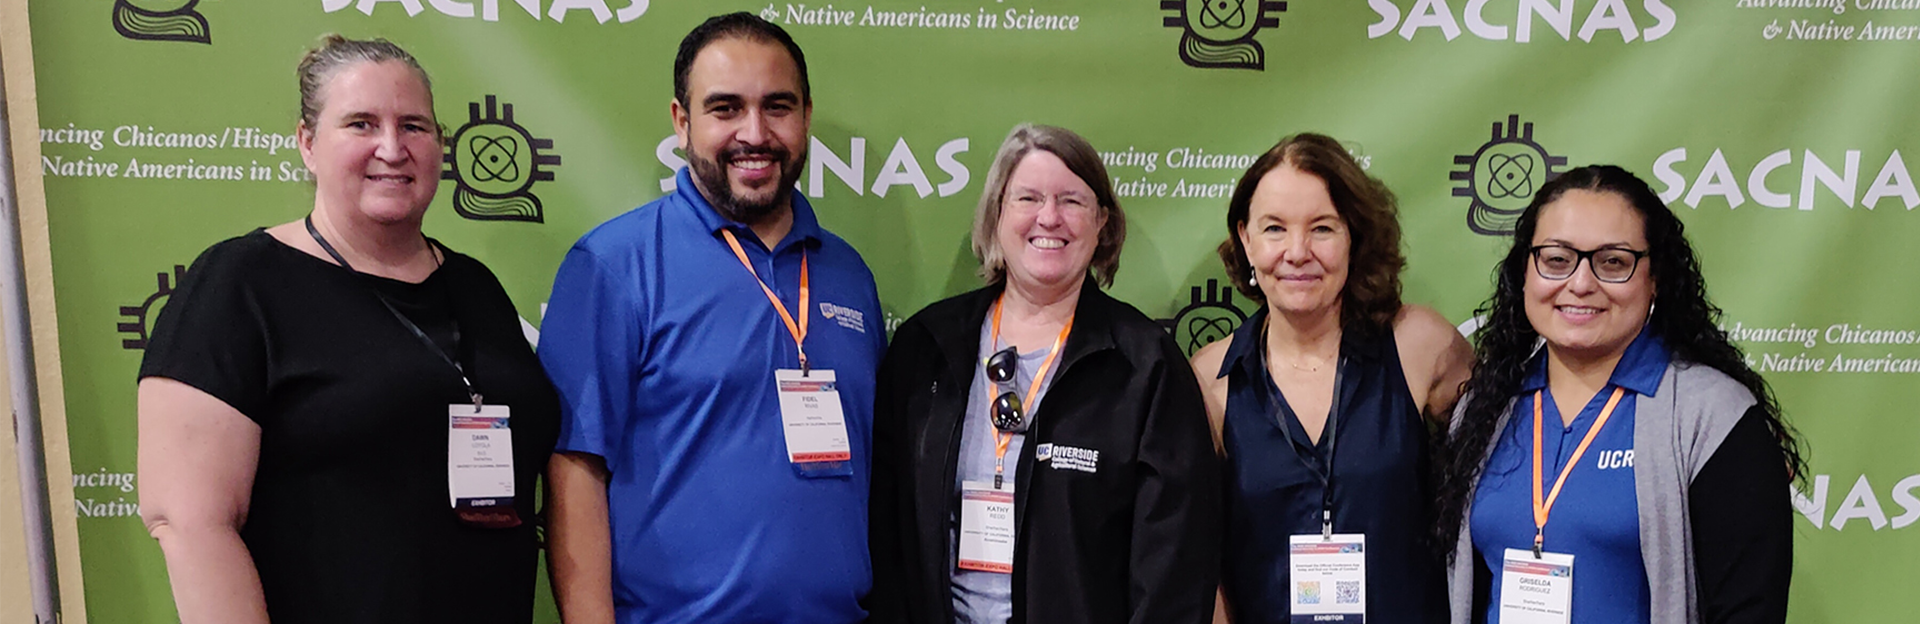 SACNAS Conference Group Picture Slider